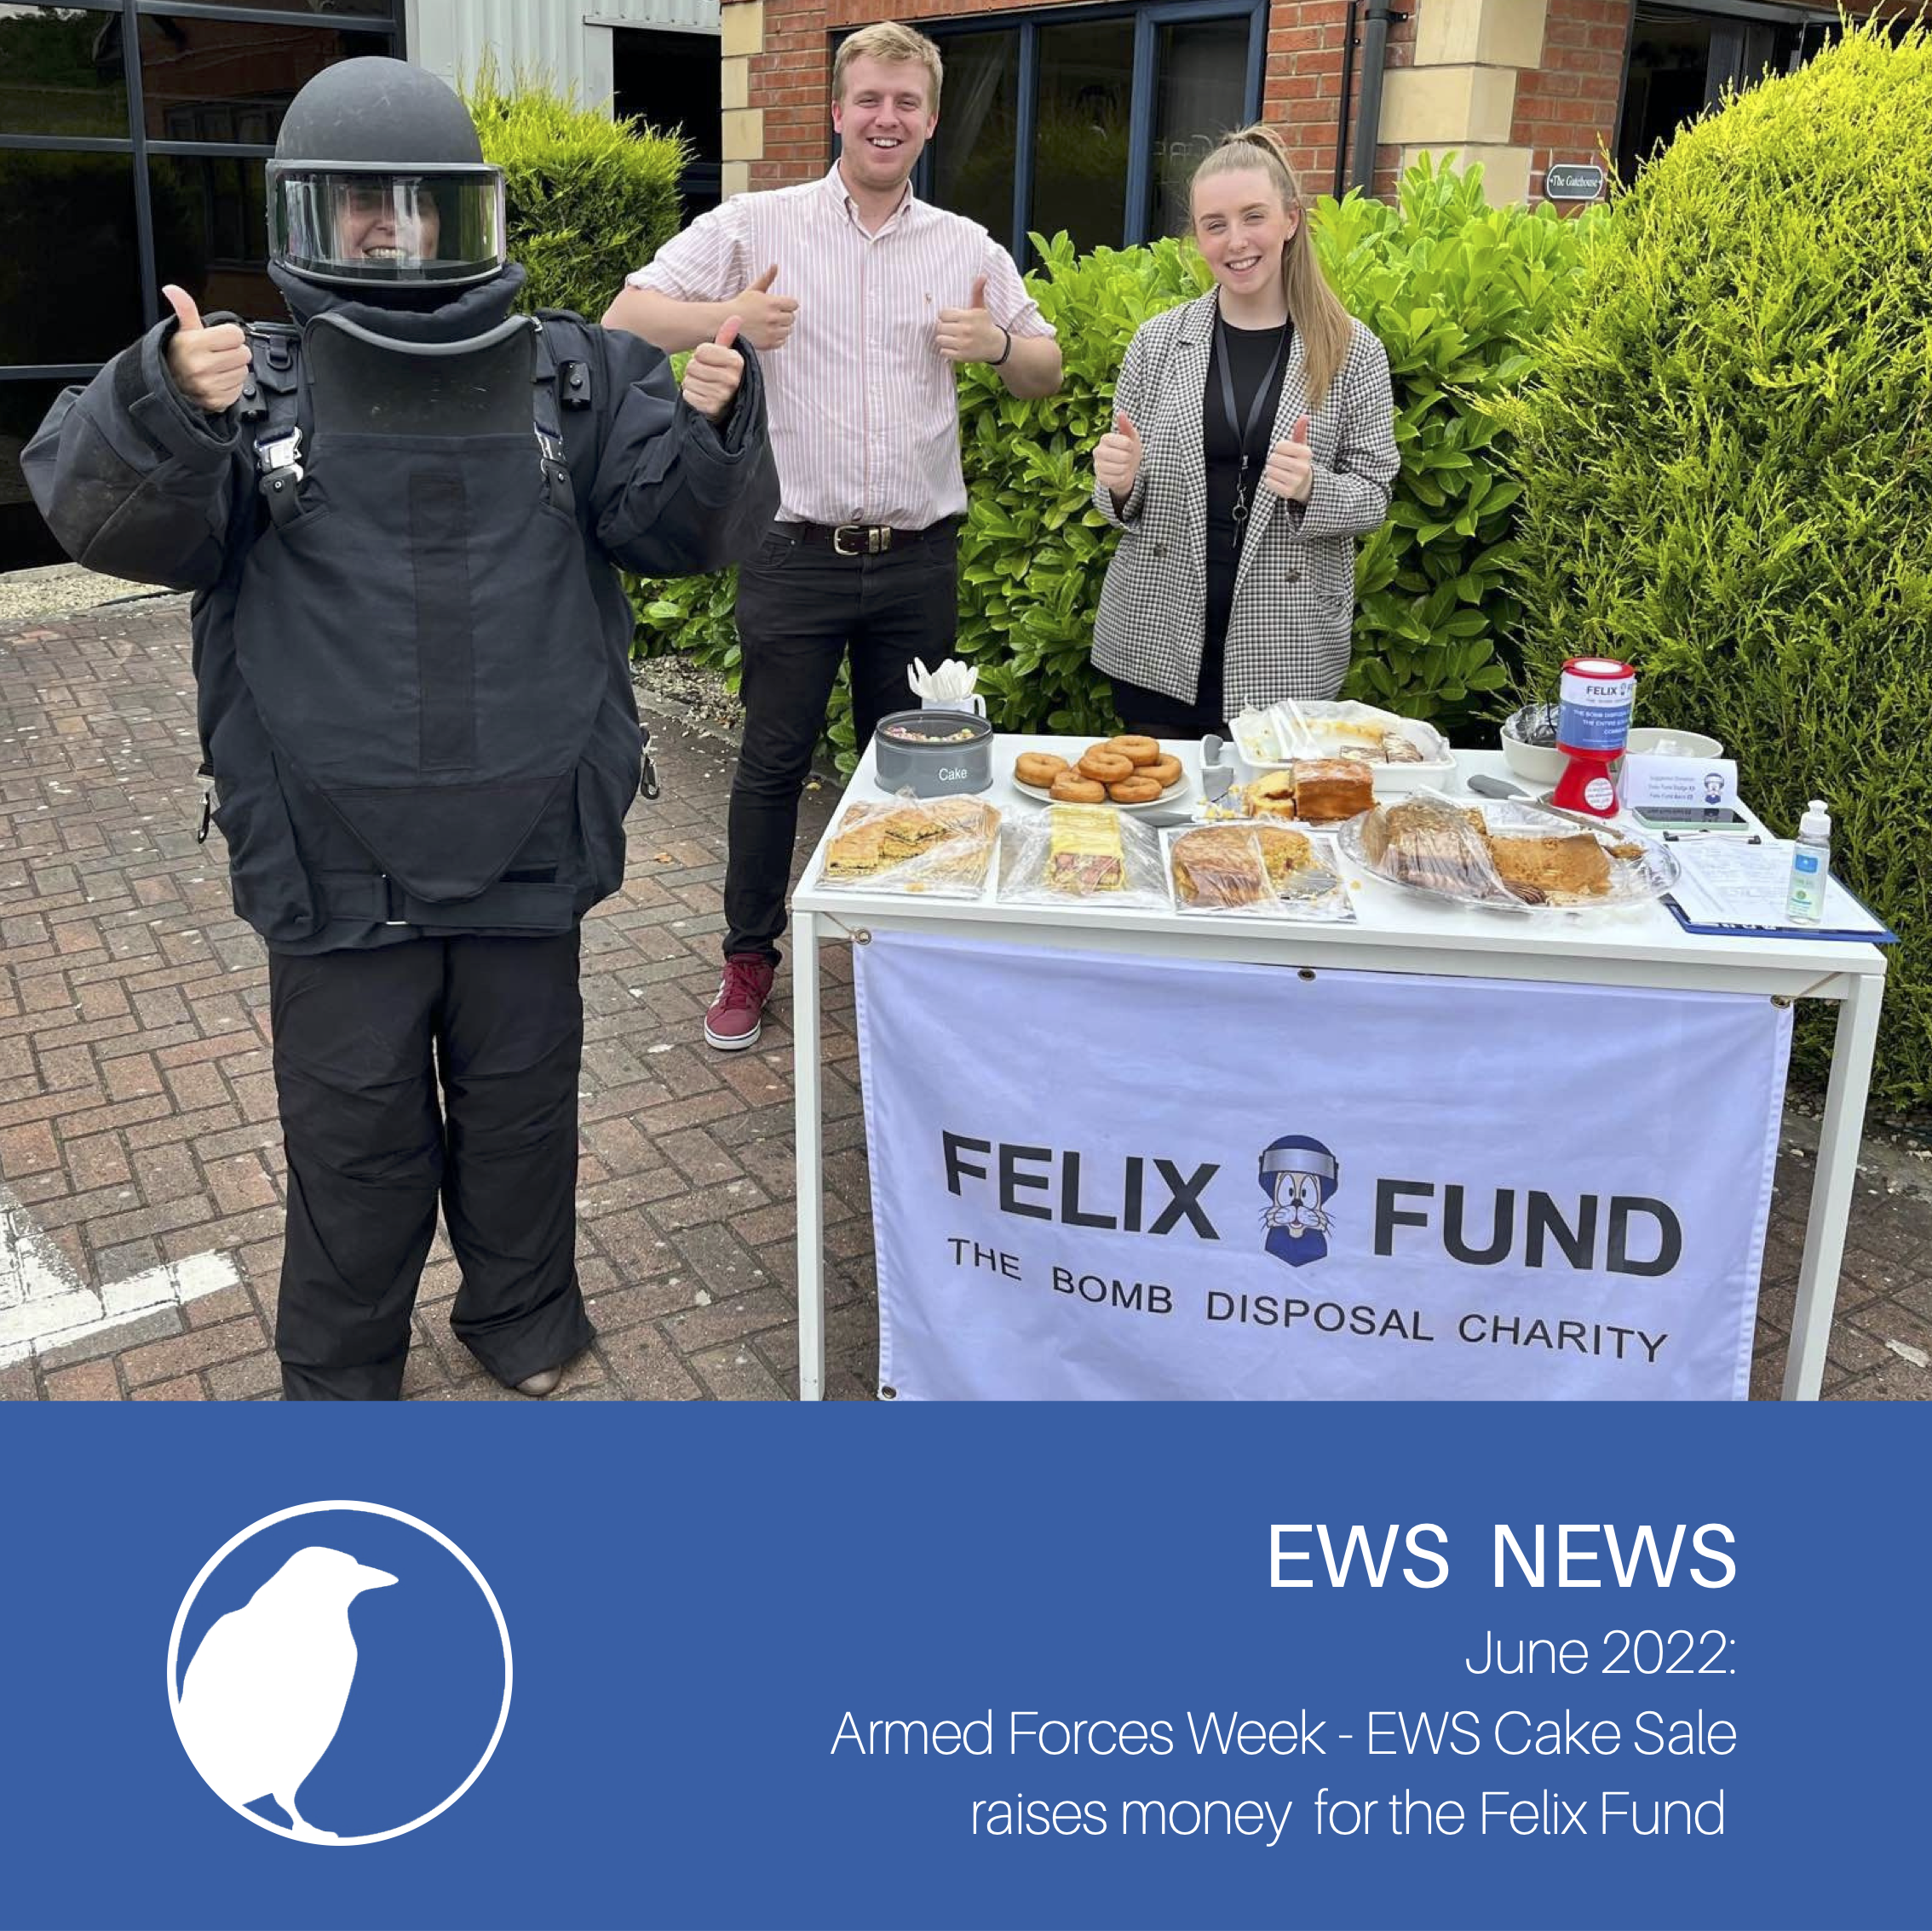 EWS raises money for The Felix Fund as part of Armed Forces Week